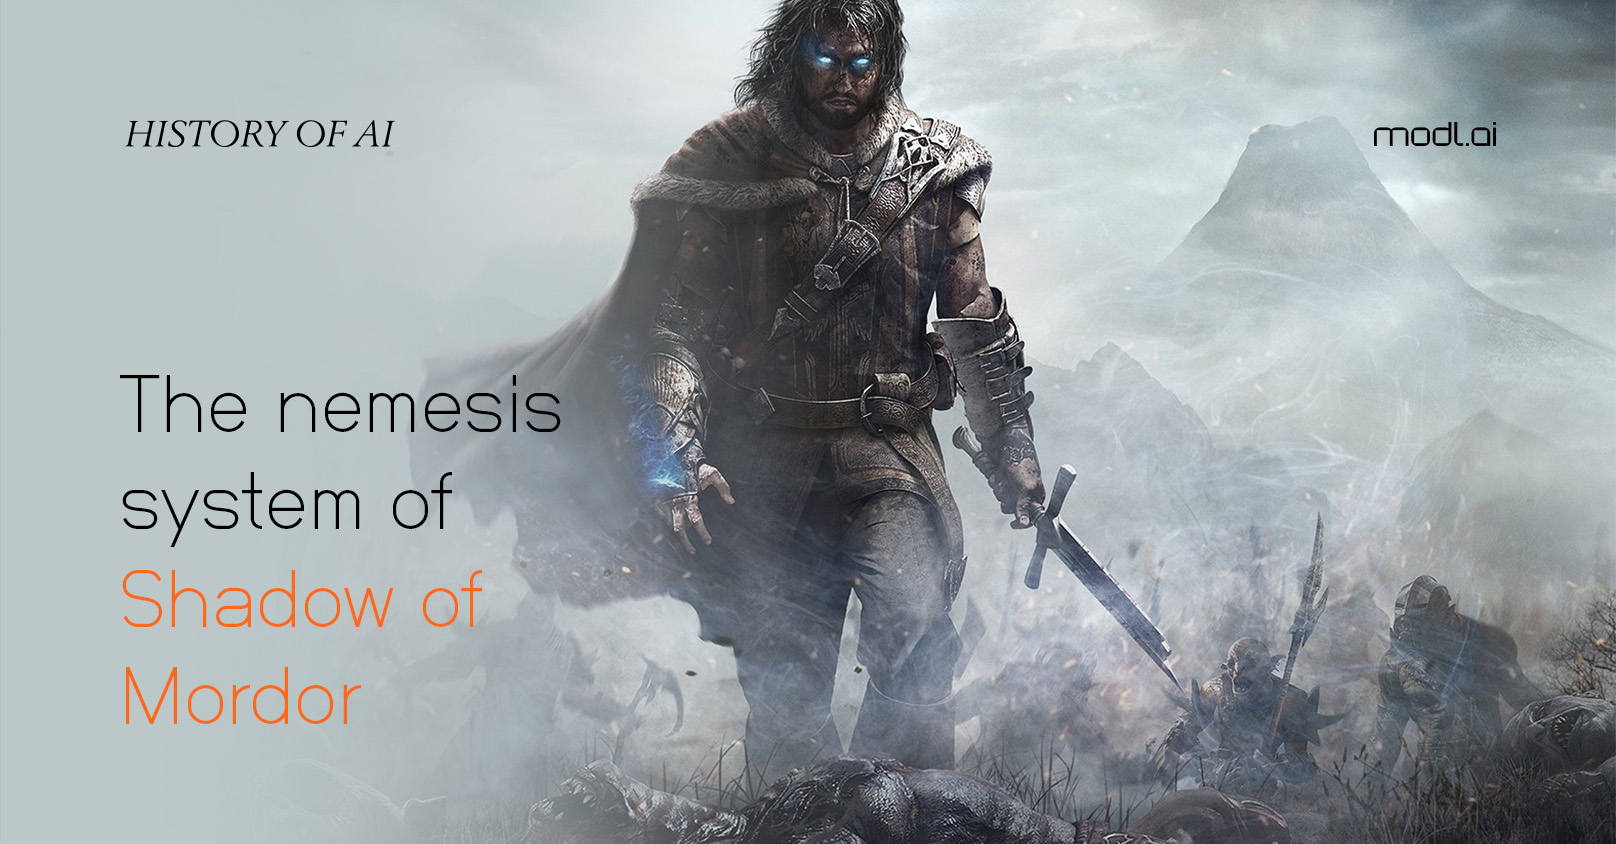 Middle-earth: Shadow of Mordor 2 likely in development according